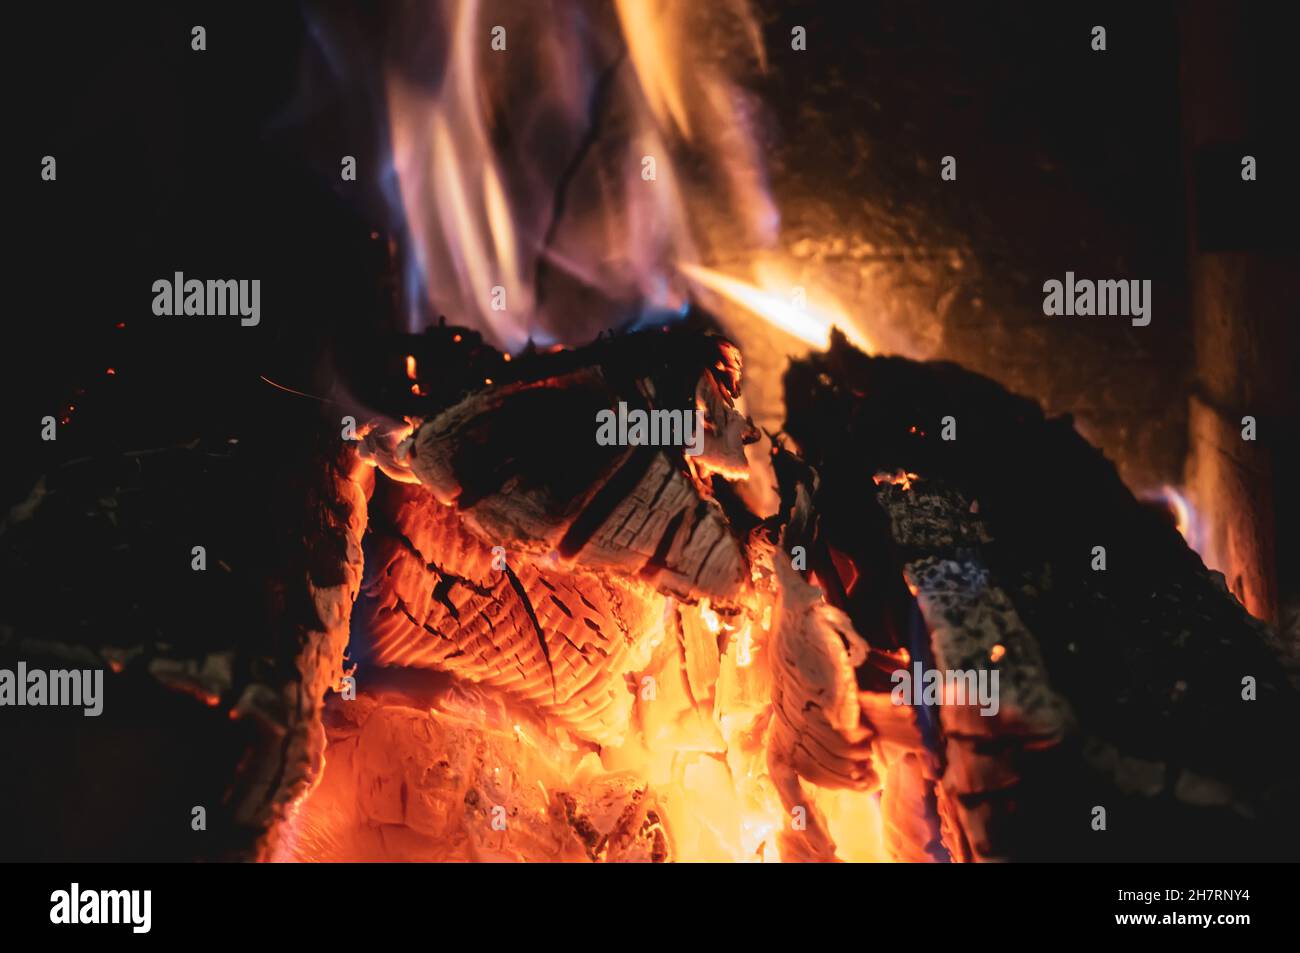 Fire burning glowing in rustic wood burning cast iron stove, log burner for heating or fireplace Stock Photo